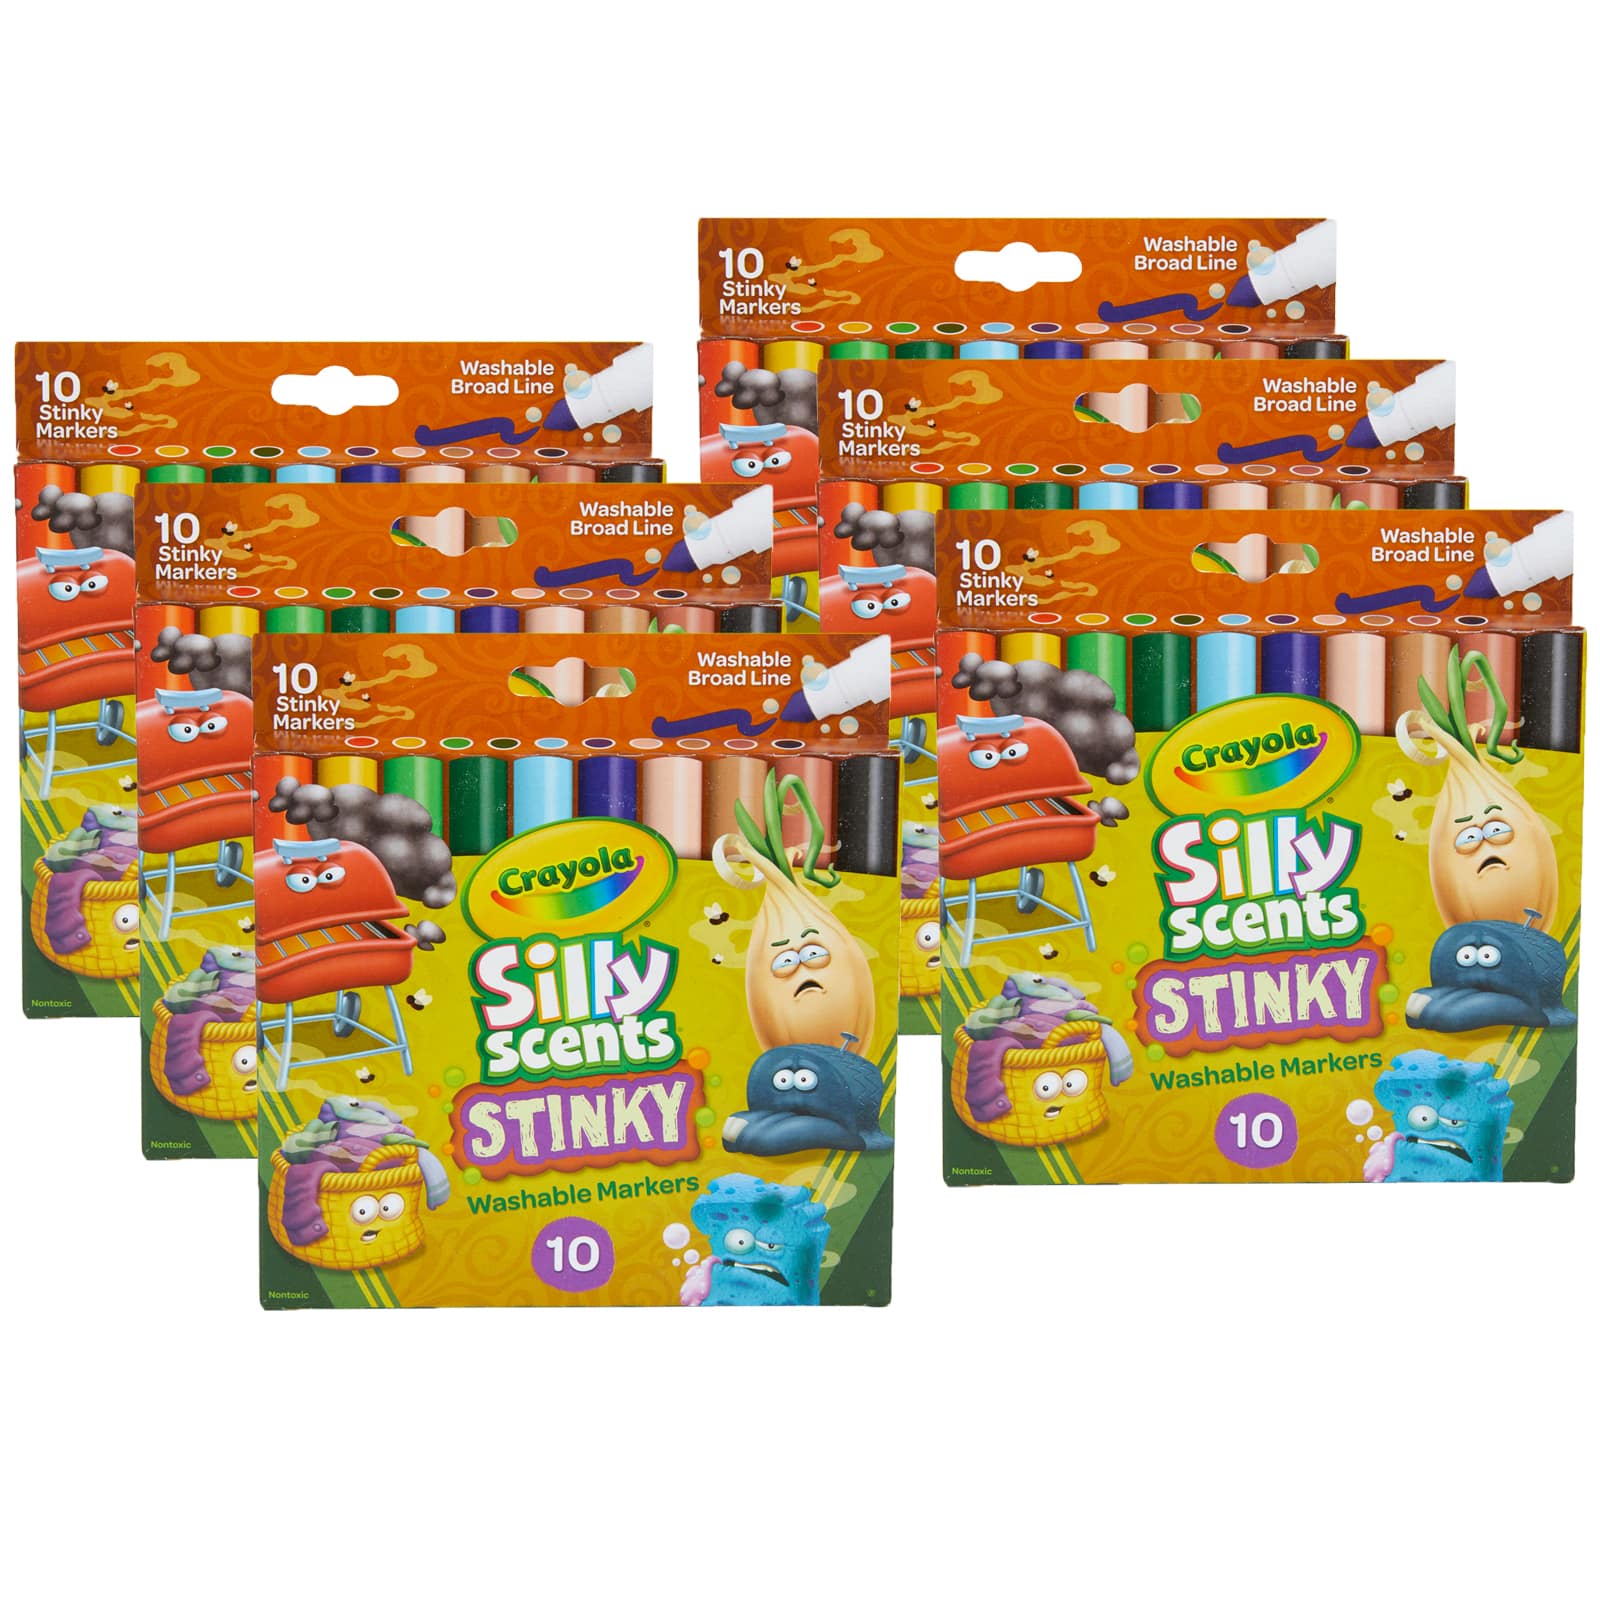 Crayola® Silly Scents Stinky Washable Broad Line Markers, 6 Packs